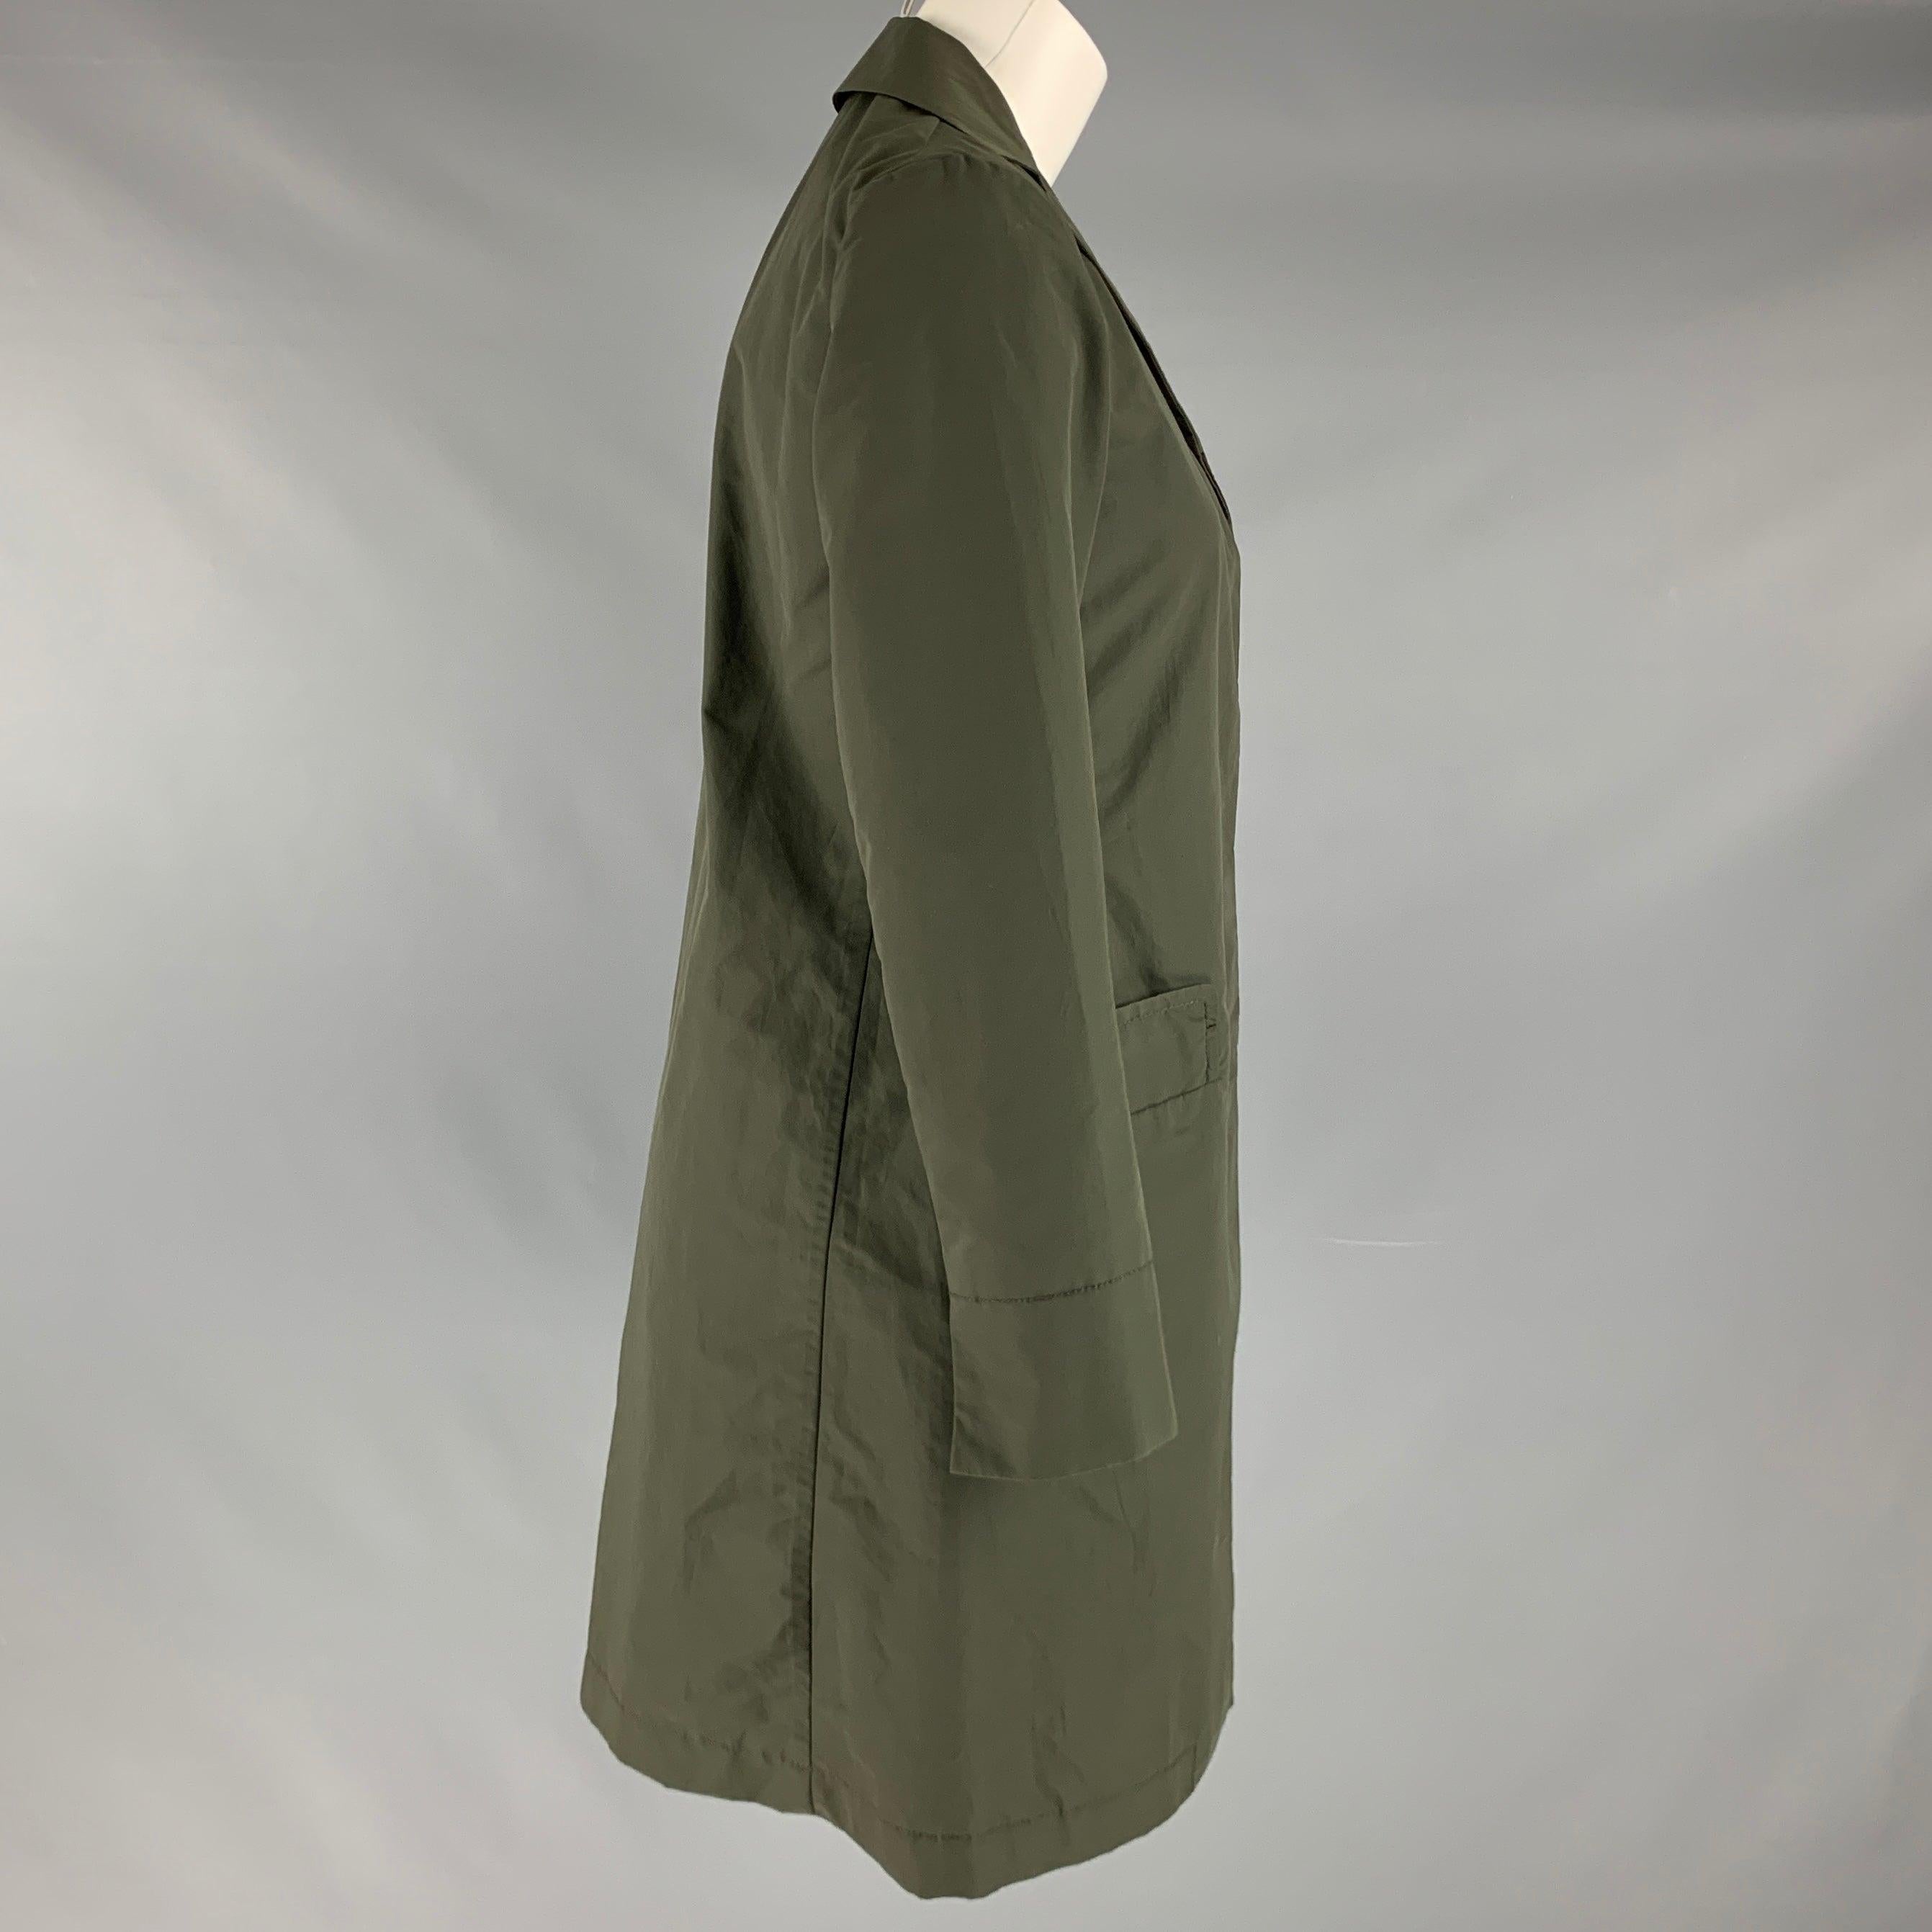 JIL SANDER coat comes in a olive green cotton and polyamide woven featuring a notch lapel, patch pockets, hidden packet, and a three button closure. Made in Italy. Very Good Pre-Owned Condition. 

Marked:   2 

Measurements: 
 
Shoulder: 14.5 inches